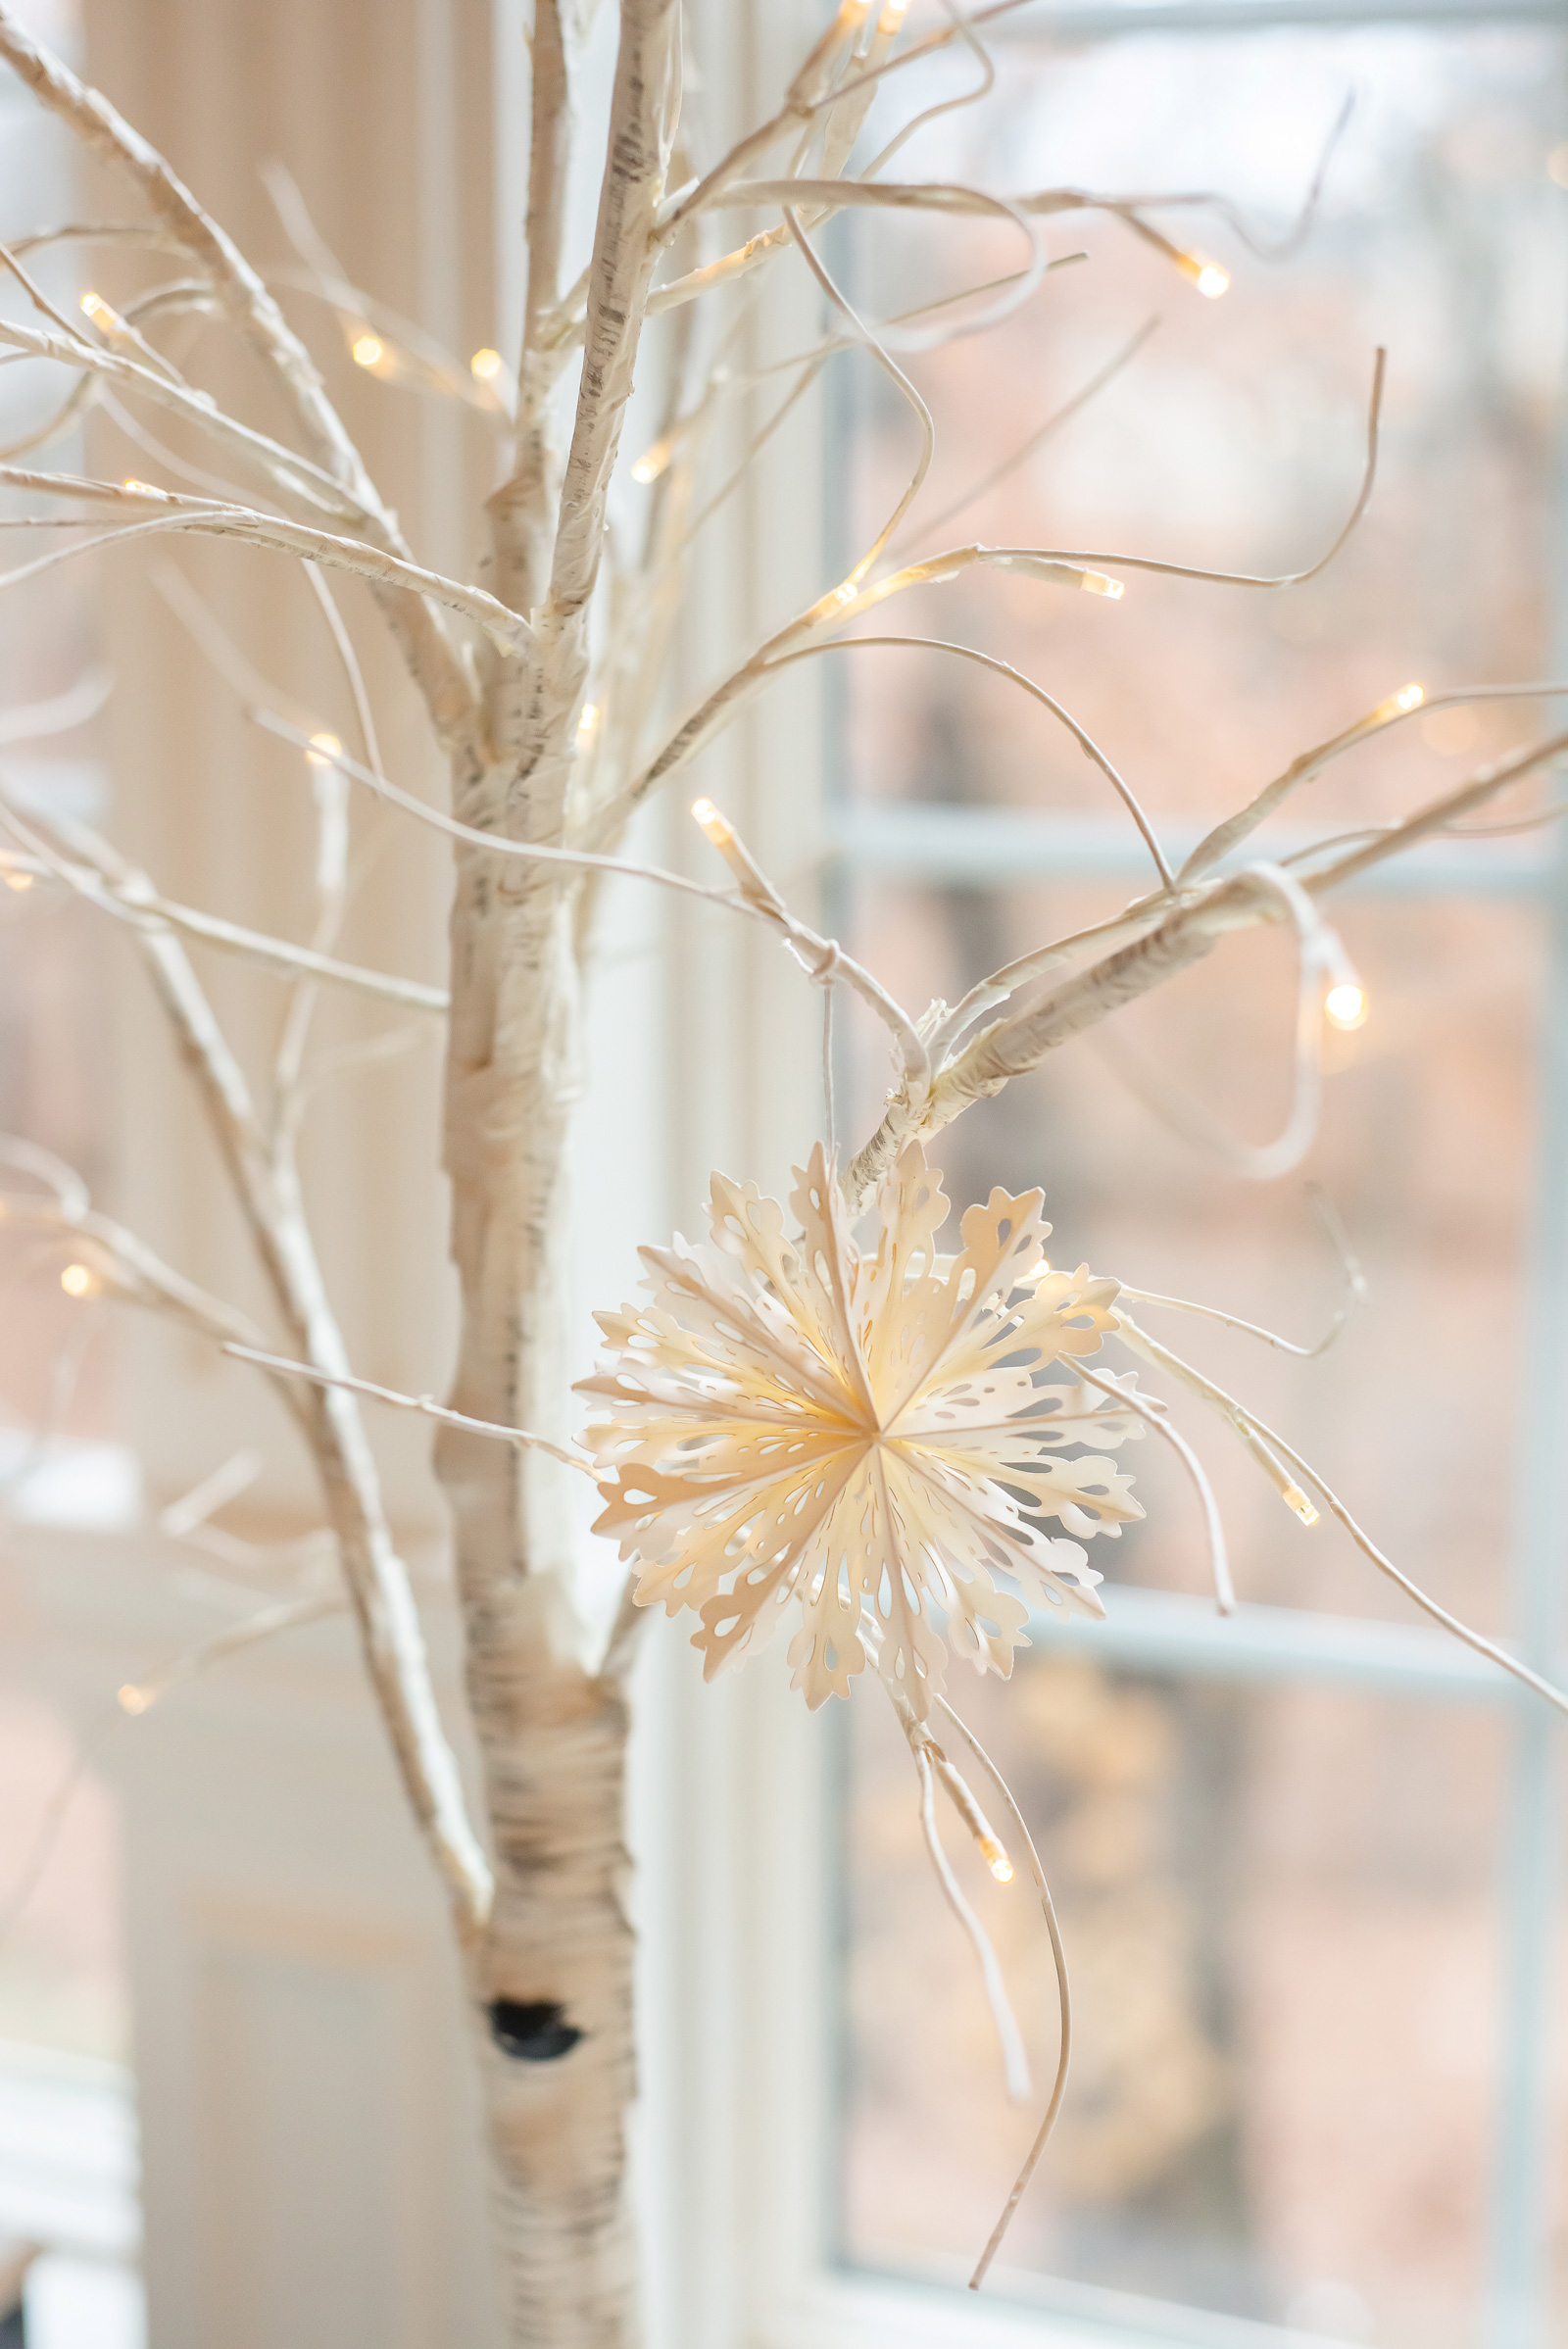 Intricate paper ornament hangs from illuminated white birch tree